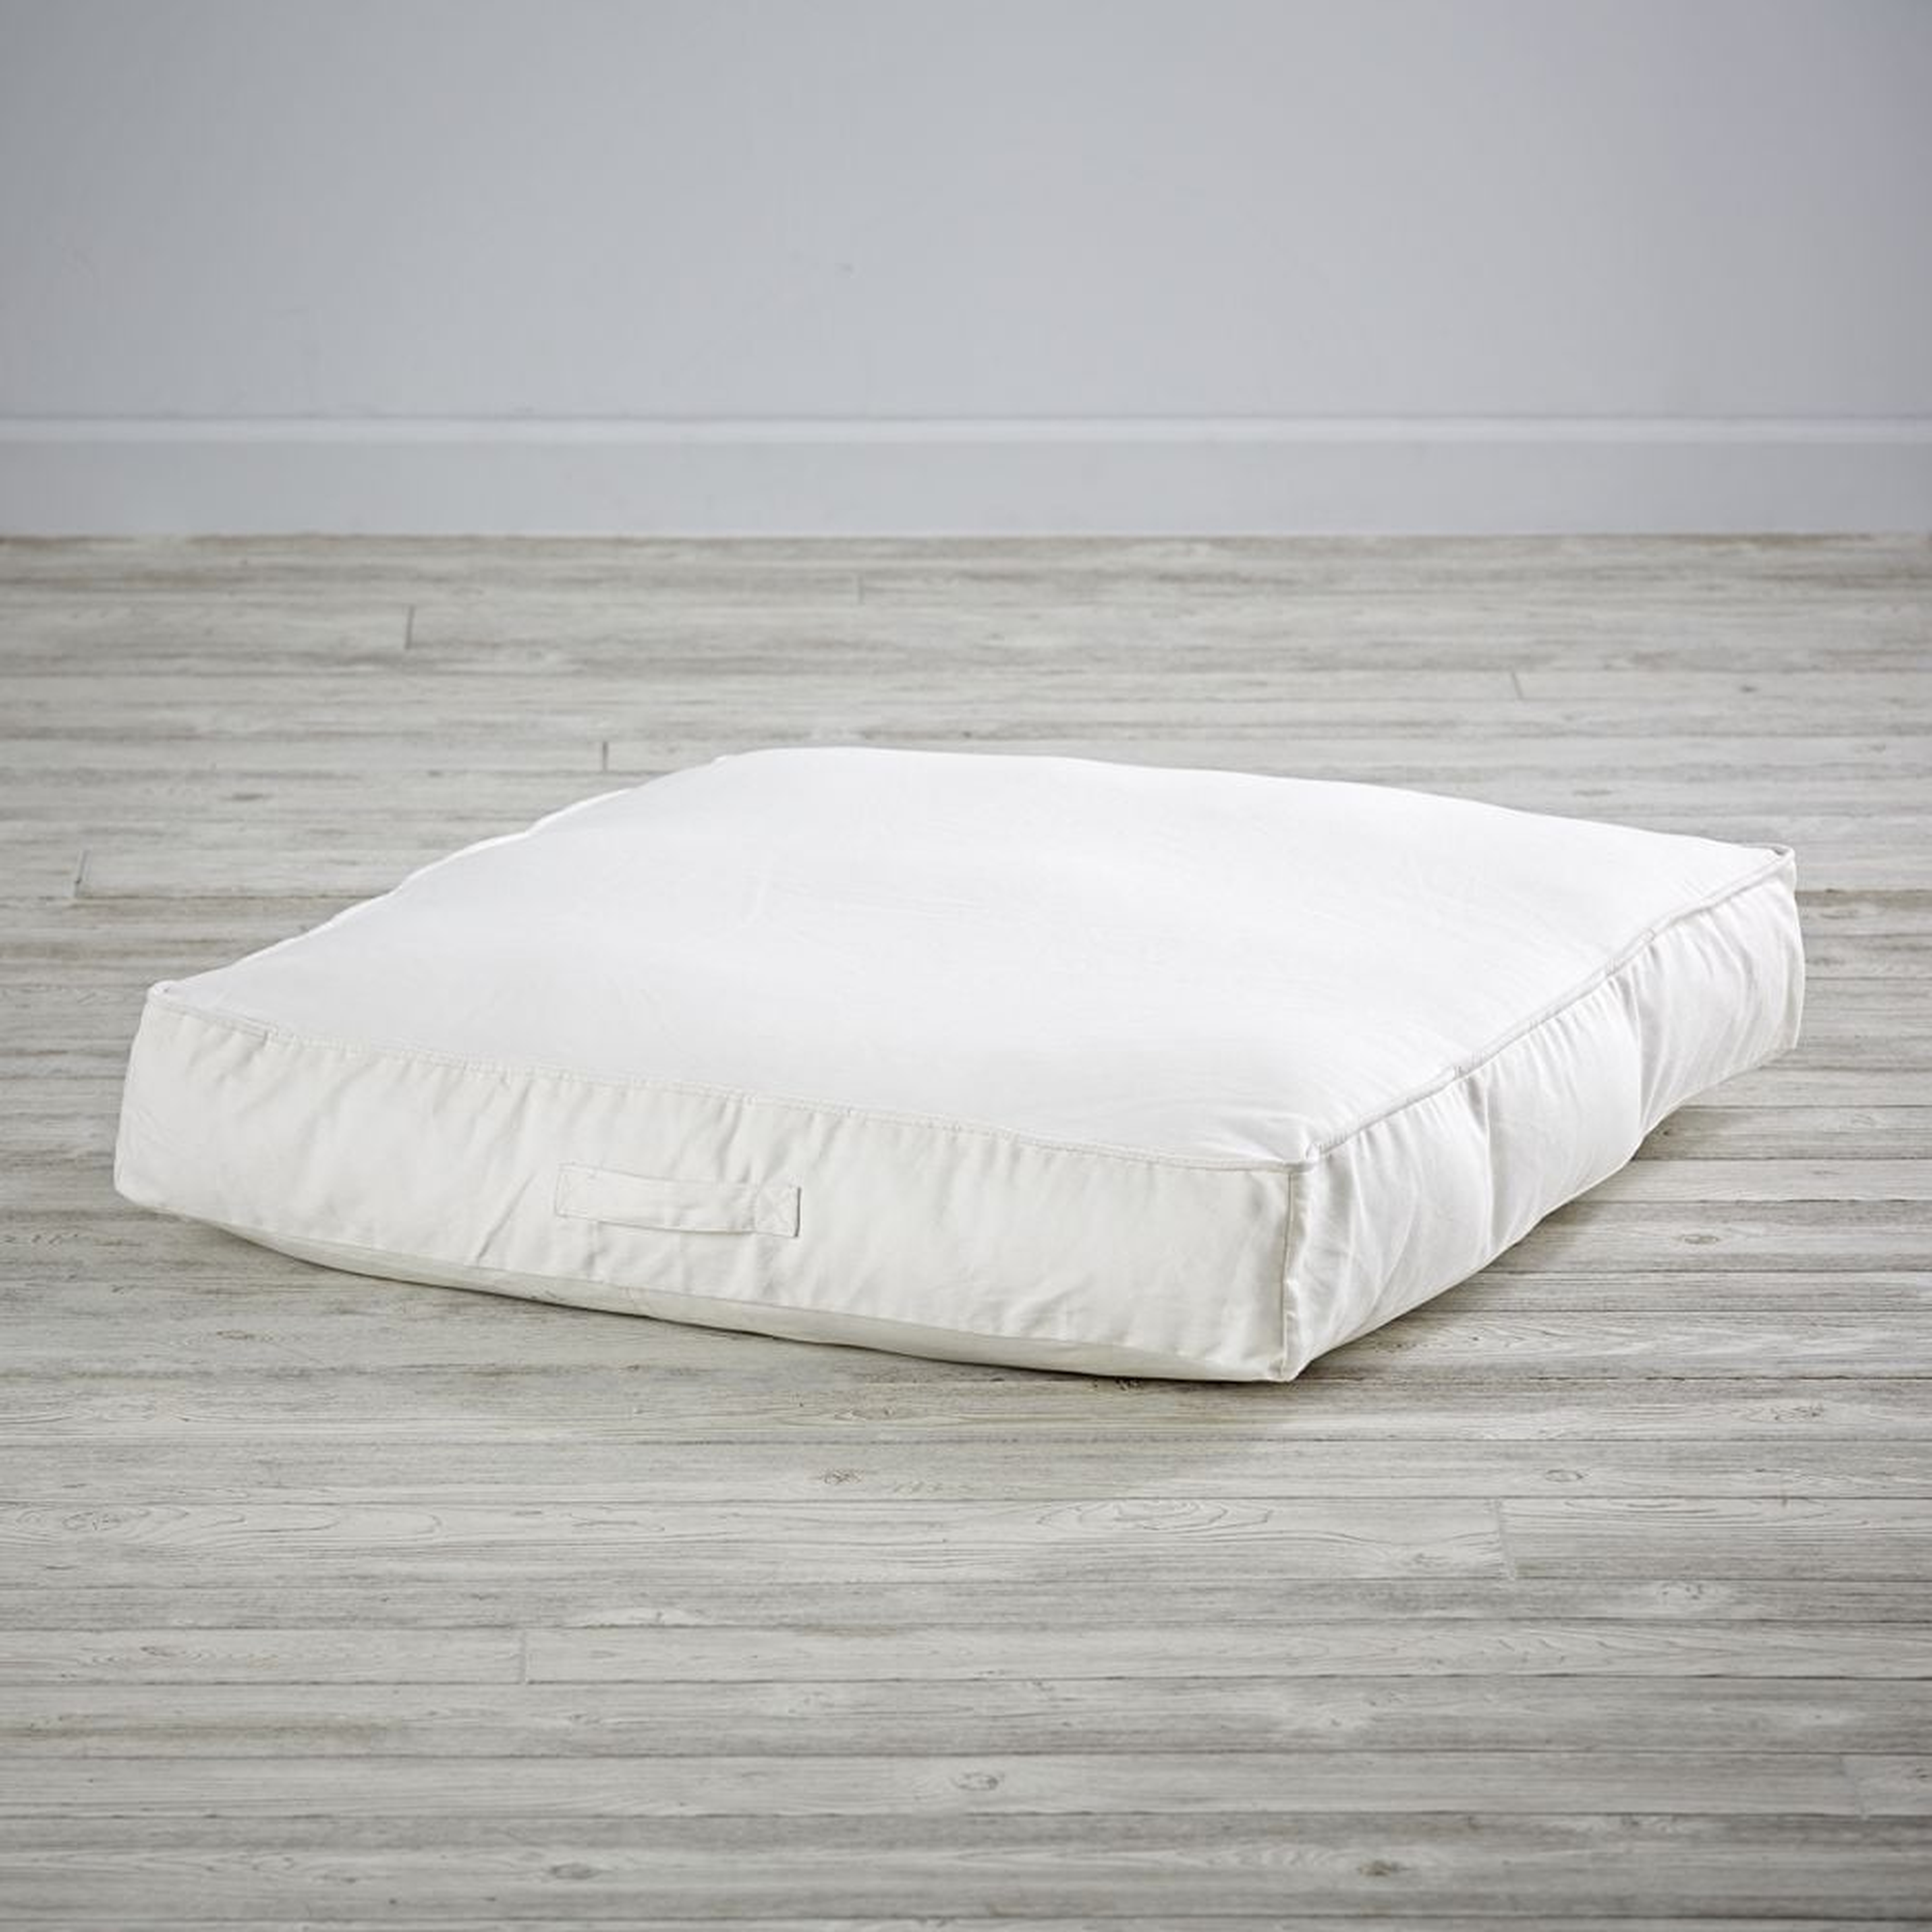 White Teepee Floor Cushion - Crate and Barrel